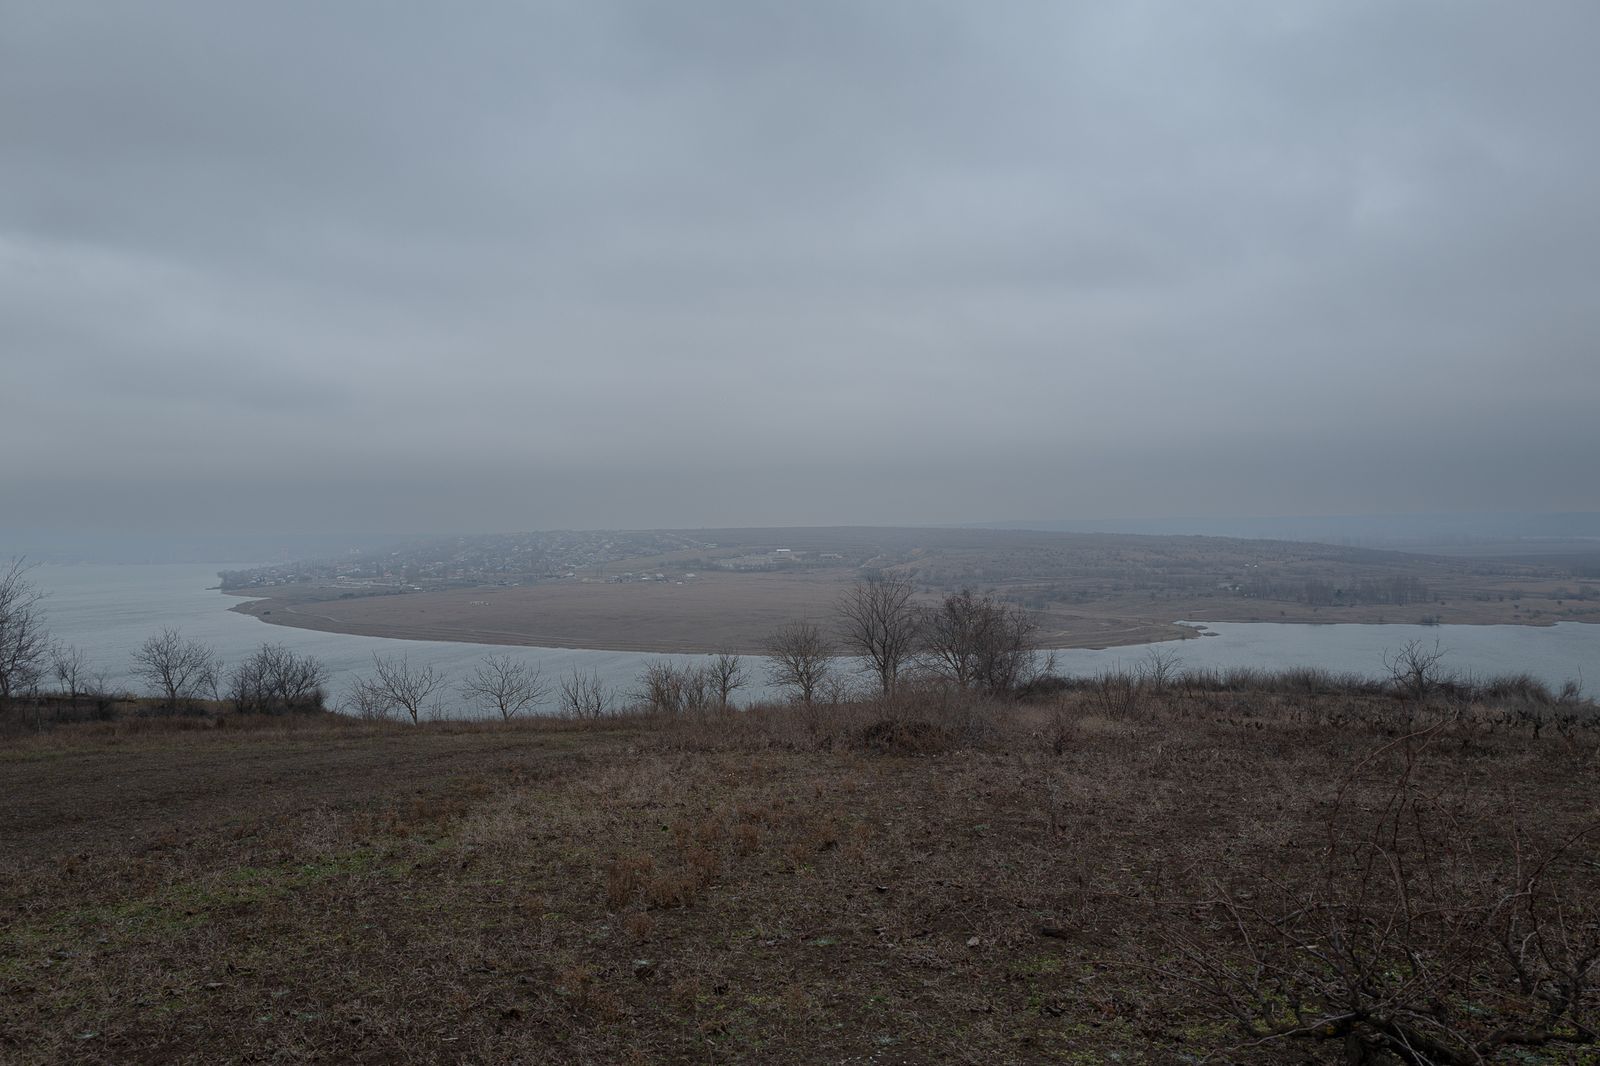 © Maurizio Gjivovich - Burnings / Transnistrian security zone - view across the Dniester River towards the Town of Molovata Novà